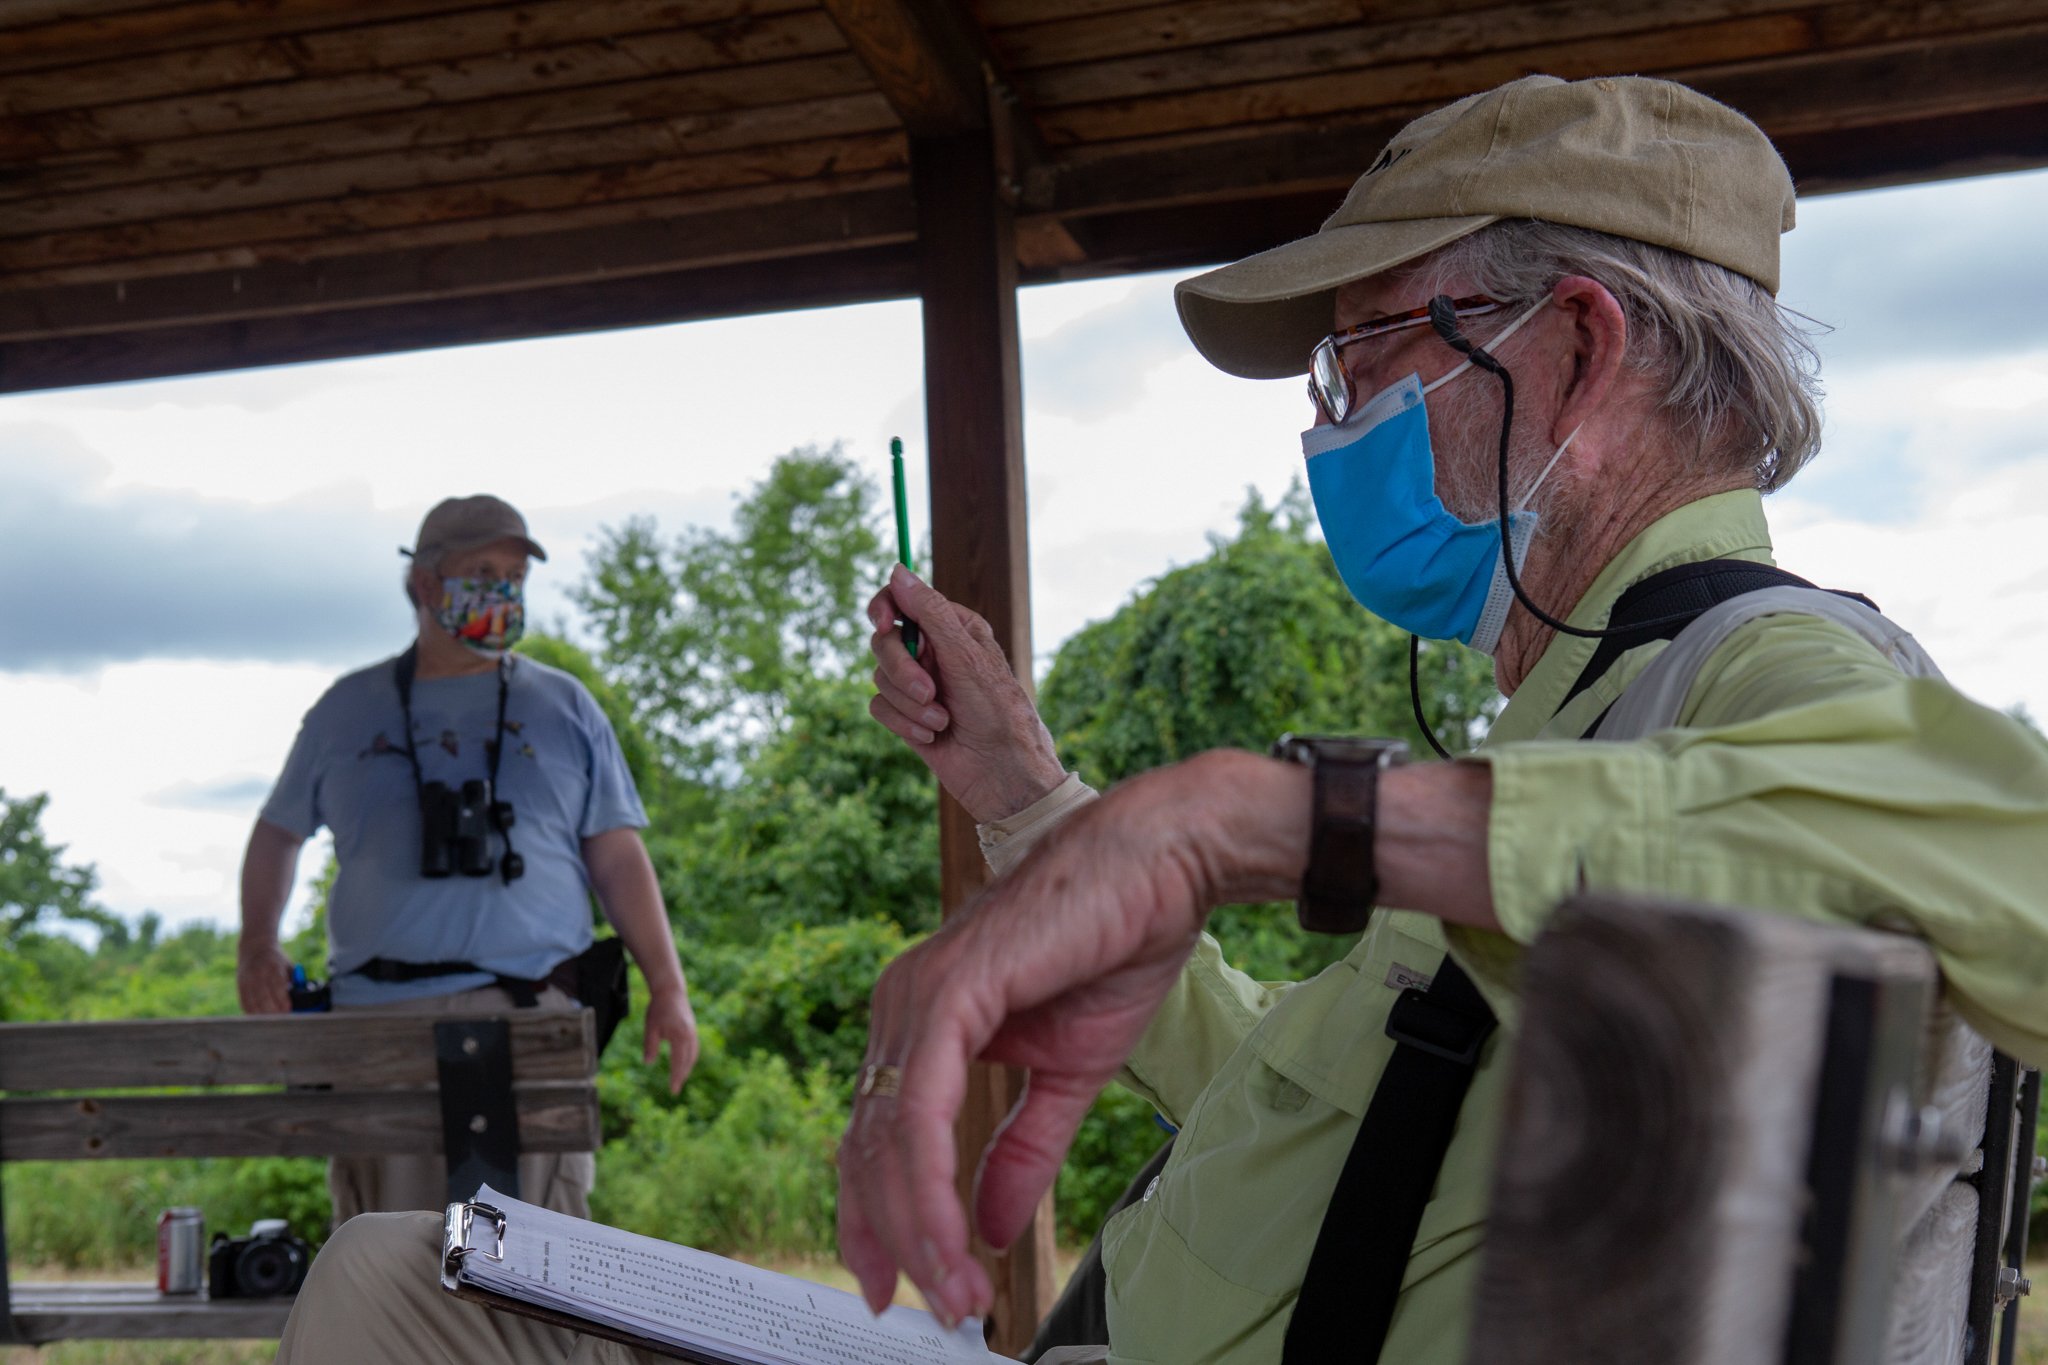  Jim Waggener tallying the results of that day's survey. The group spent the morning searching for butterflies and dragonflies at Occoquan Bay National Wildlife Refuge. 